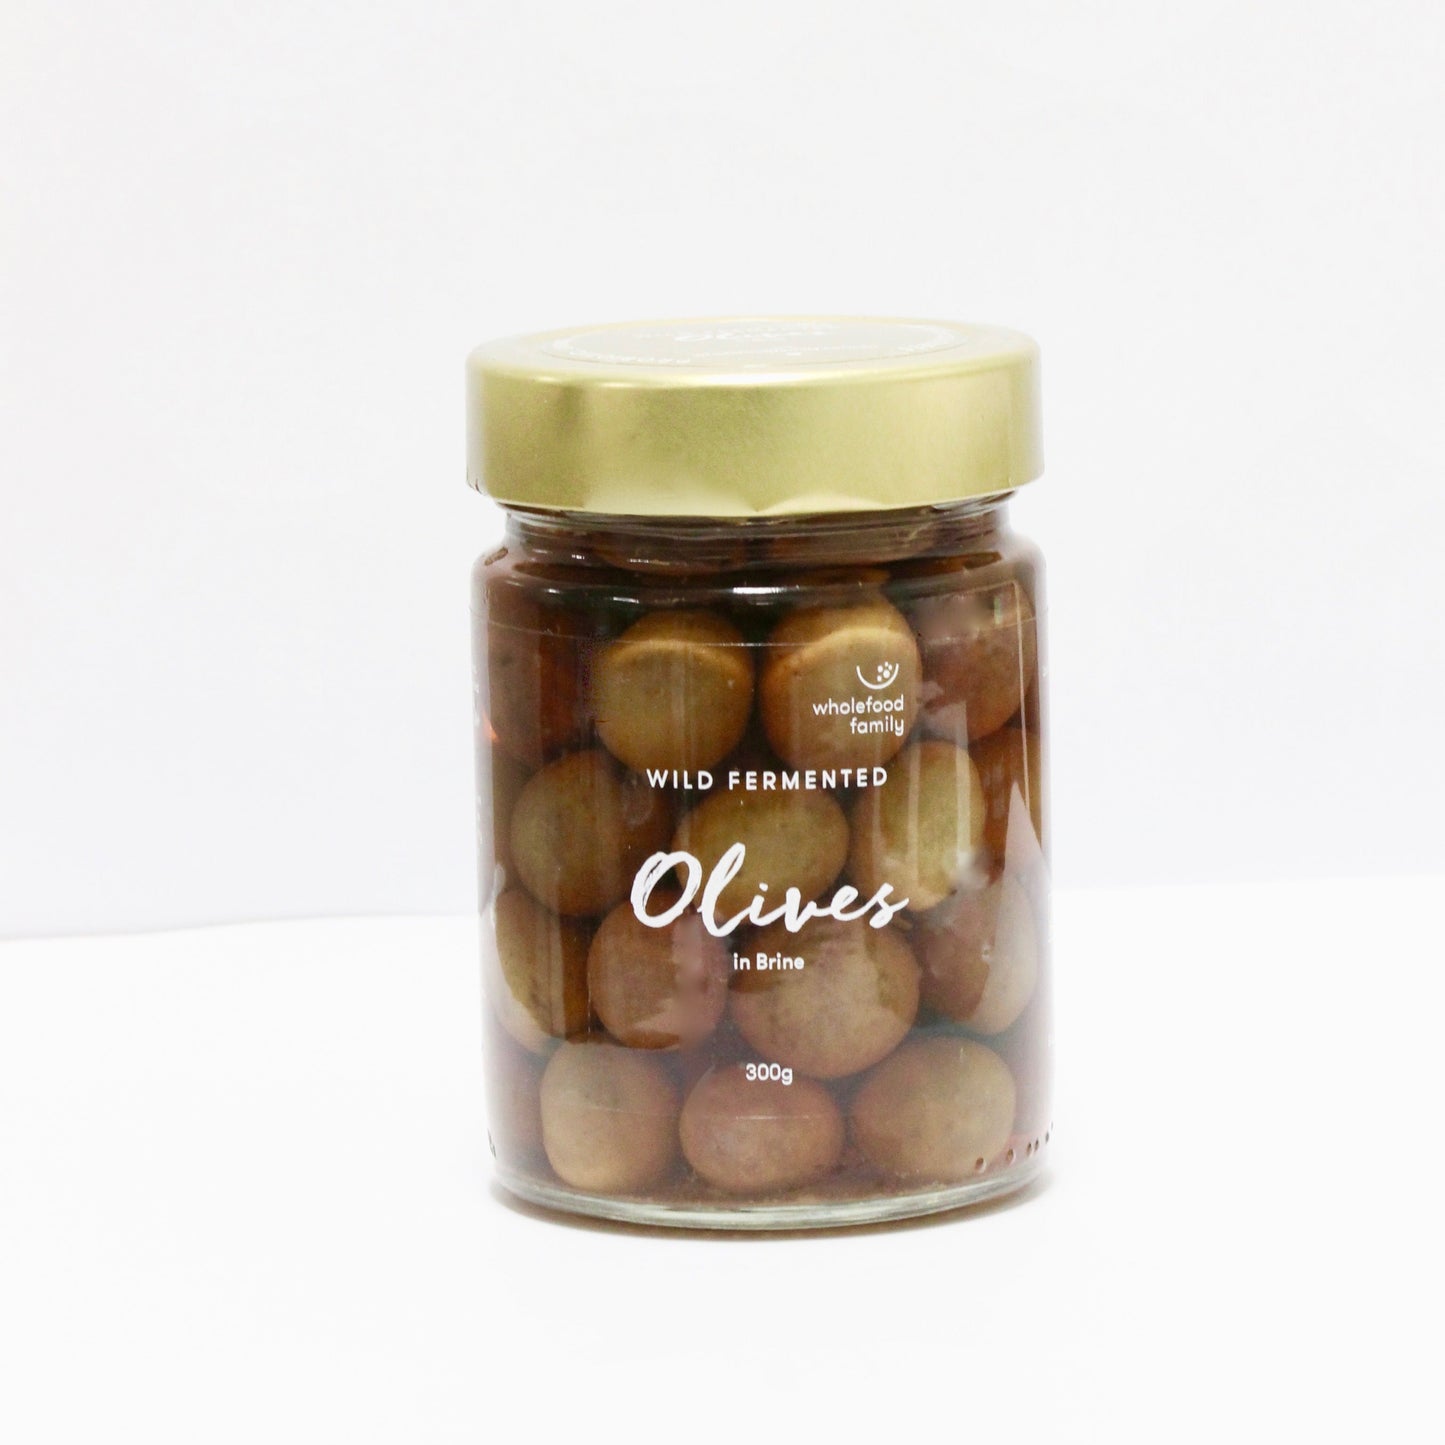 Wild fermented Olives